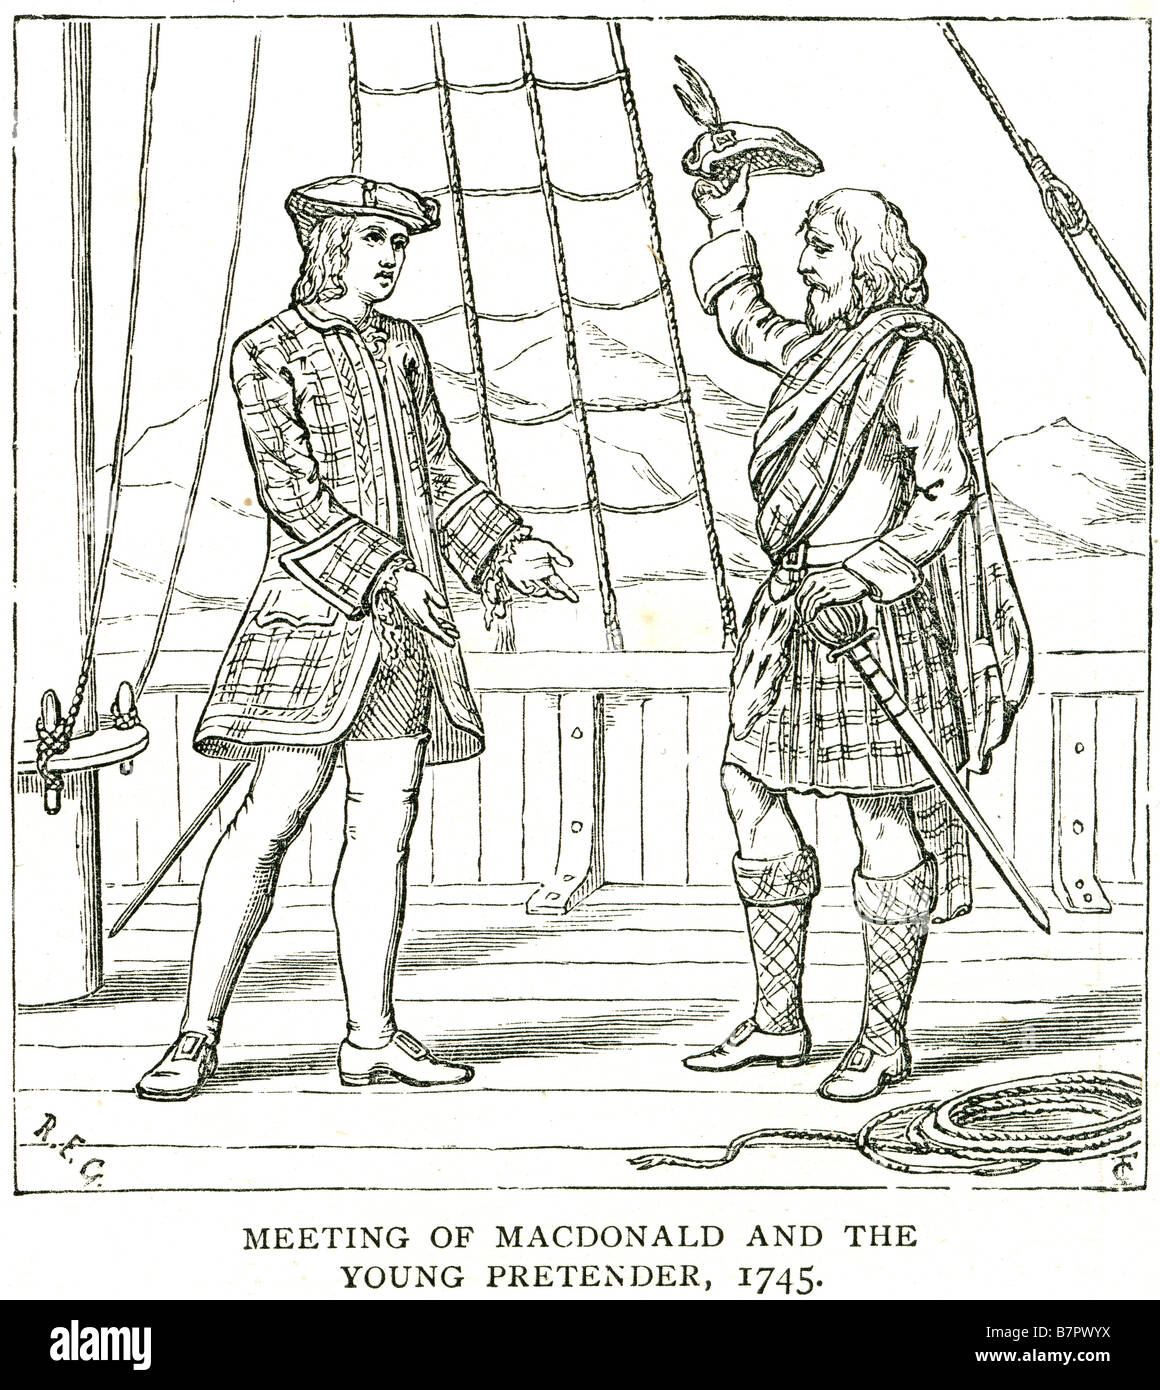 meeting of macdonald and the young pretender 1745 Charles Edward Stuart (31 December 1720  – 31 January 1788) was the exiled Jac Stock Photo